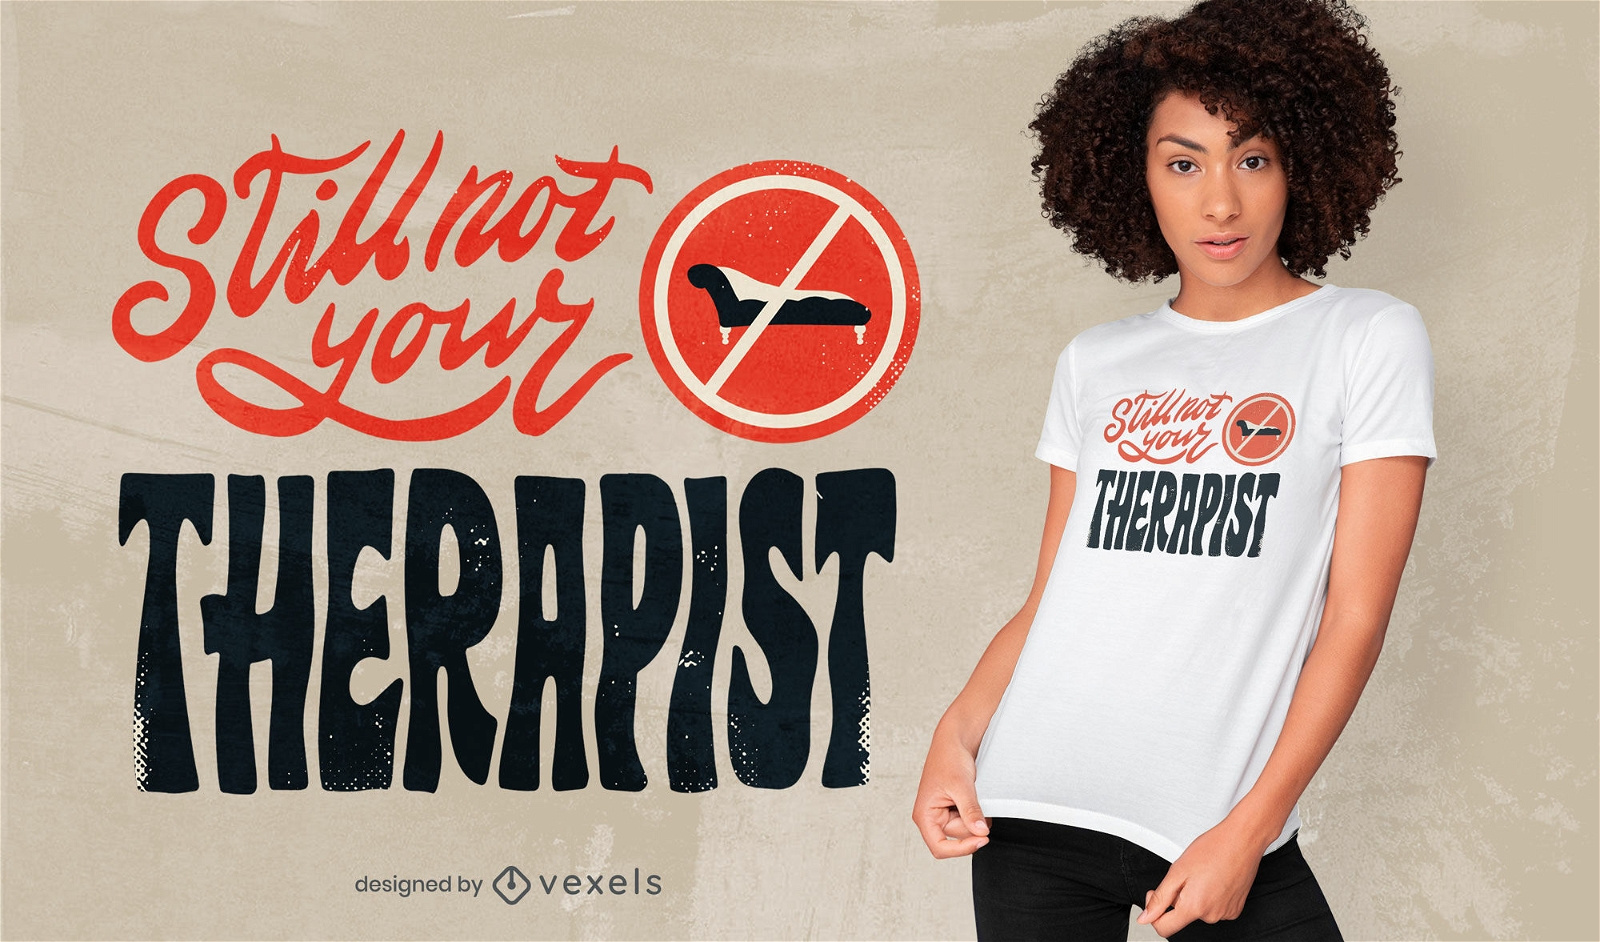 Cool not your therapist t-shirt design